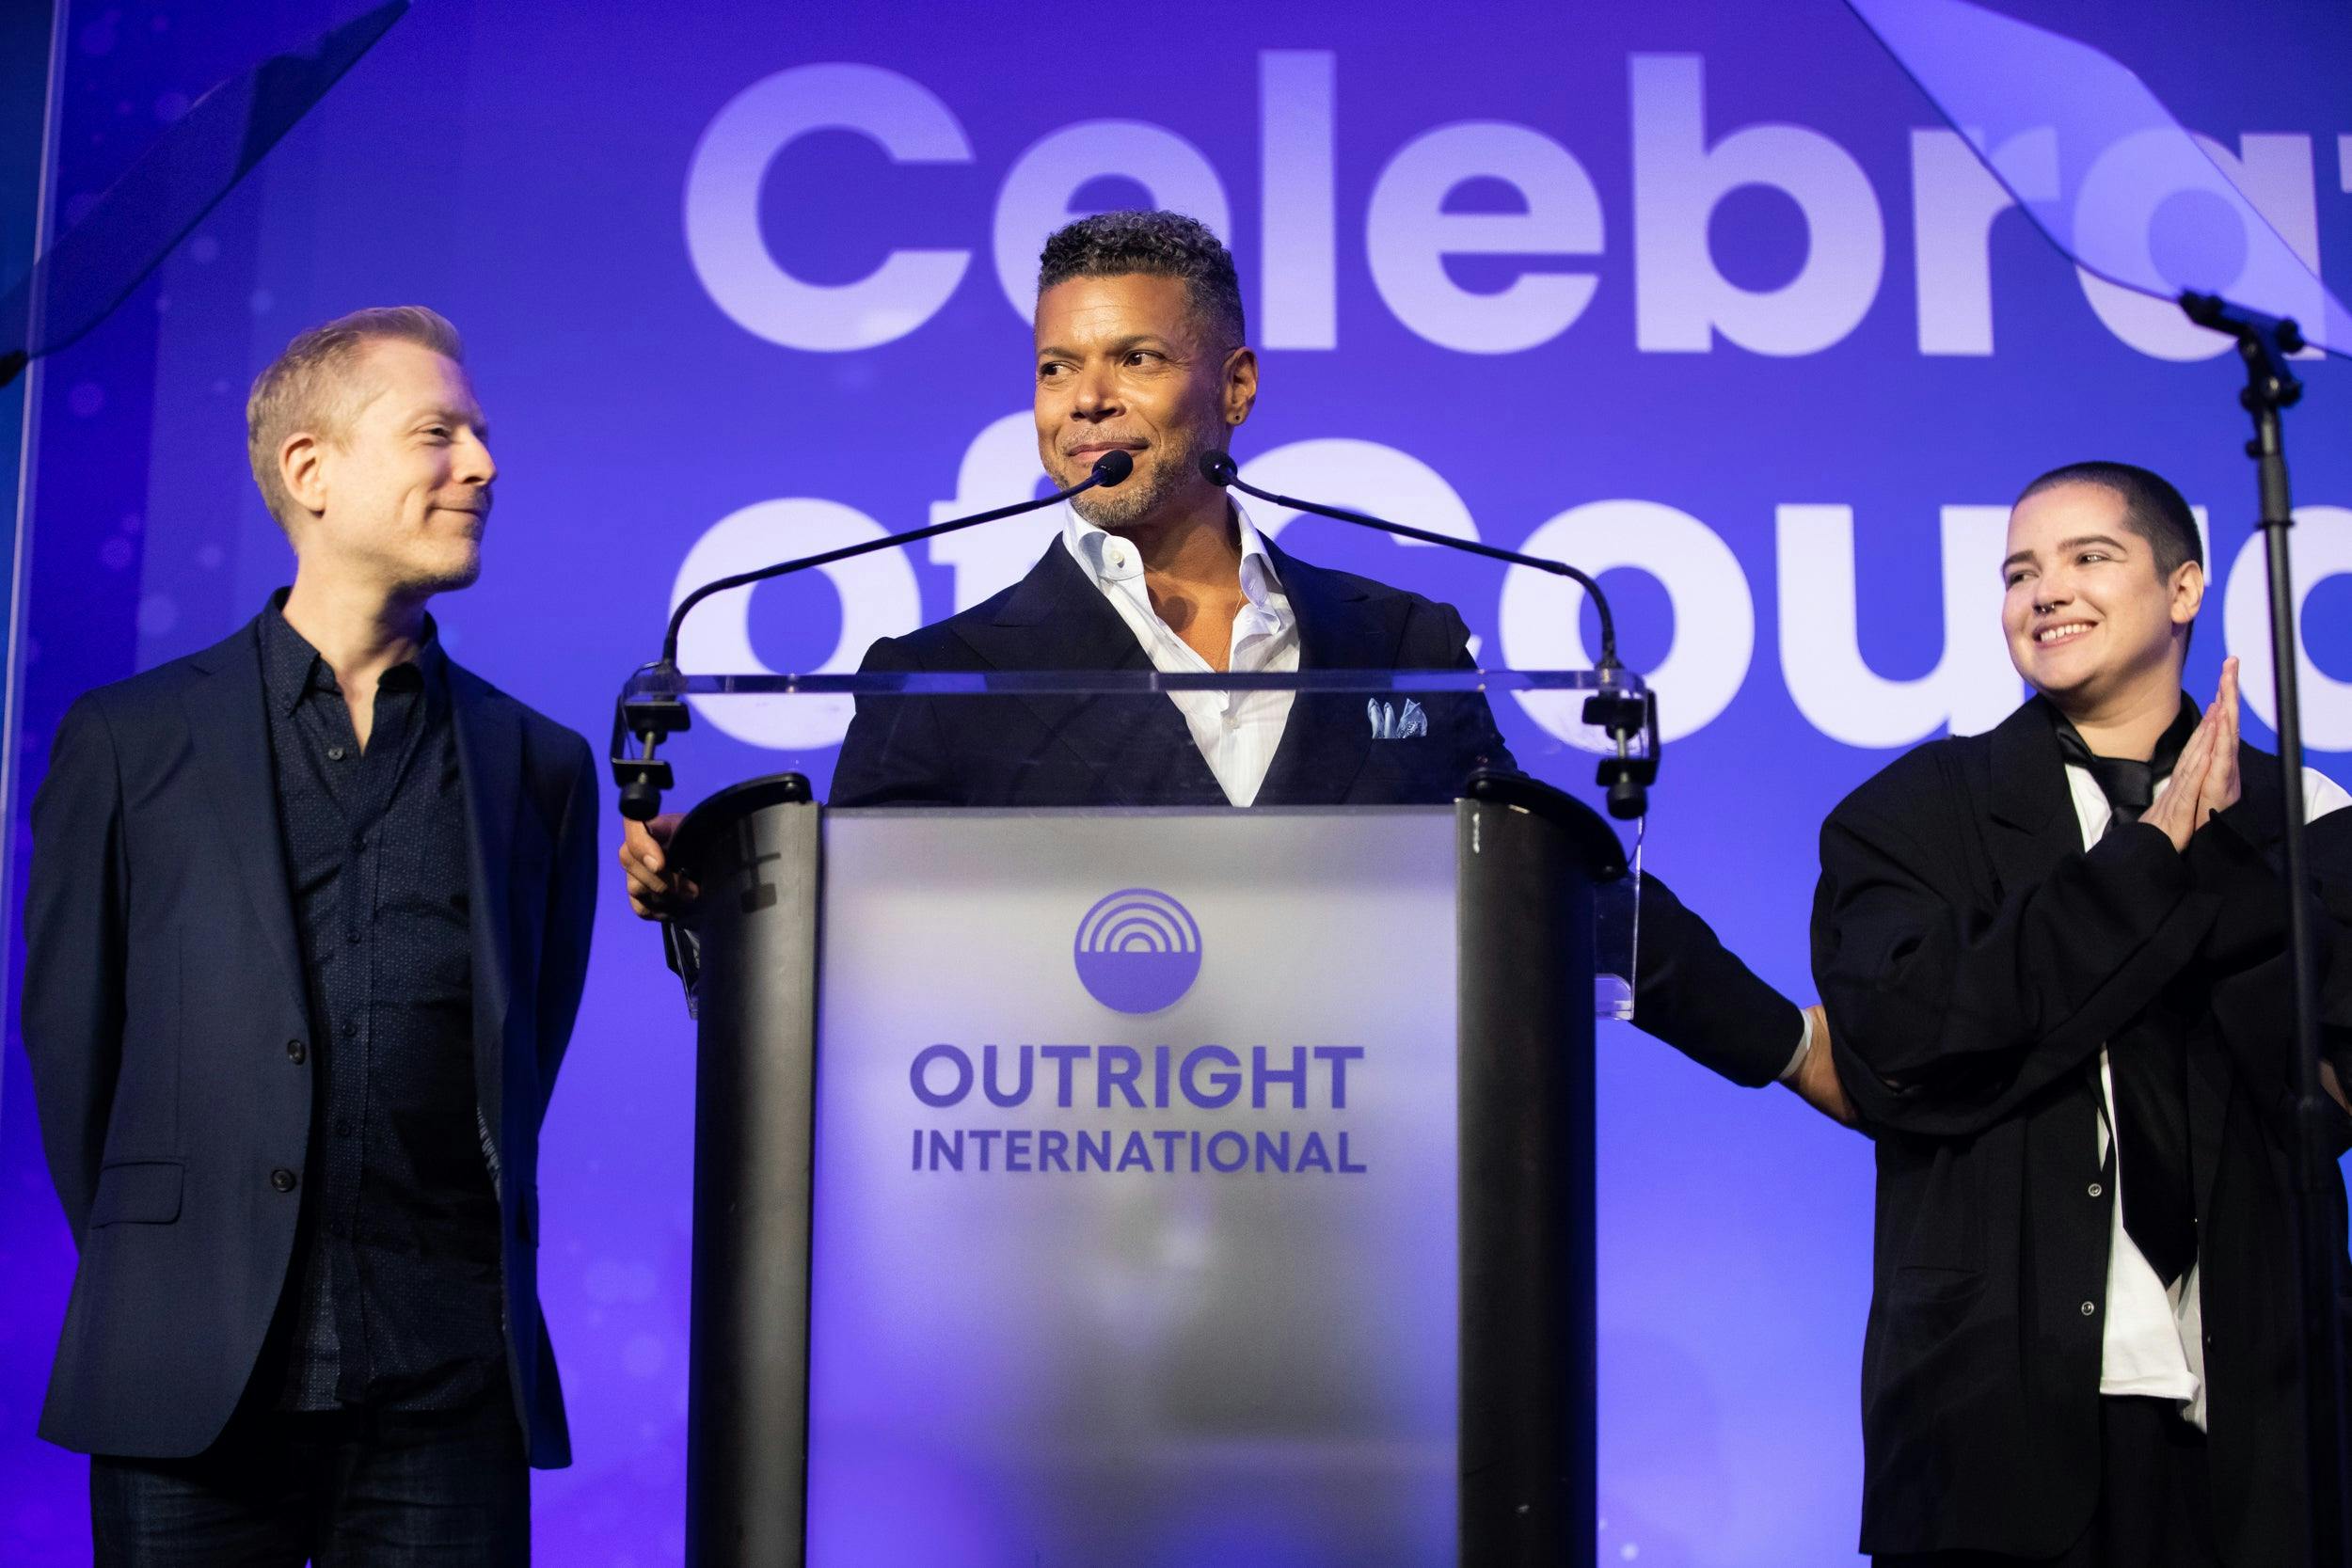 27th Celebration of Courage Awards and Gala - Star Trek: Discovery's Anthony Rapp, Wilson Cruz, and Blu del Barrio on-stage accepting this year's Outspoken Award